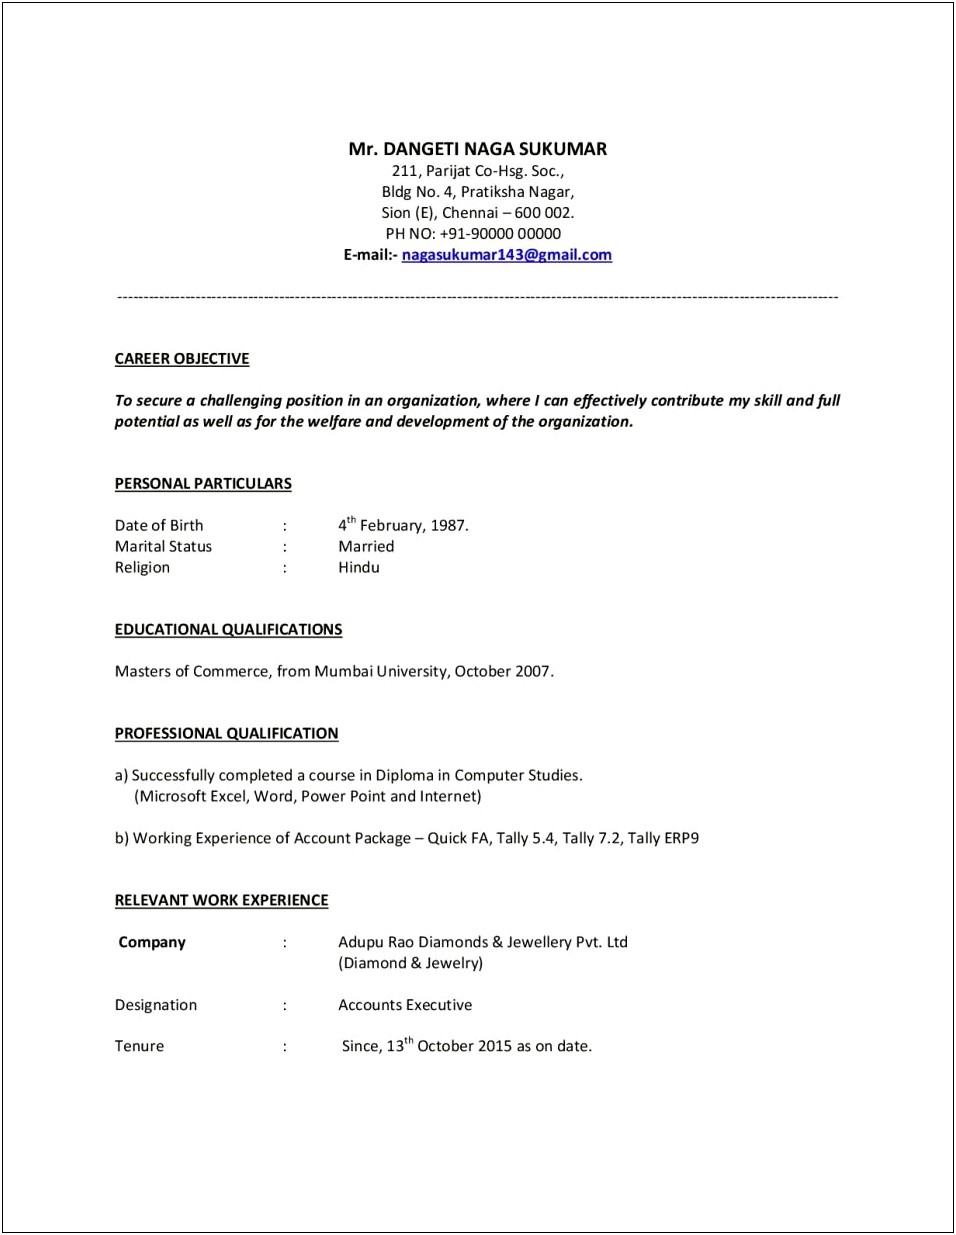 Resume Objective For Trainee Position